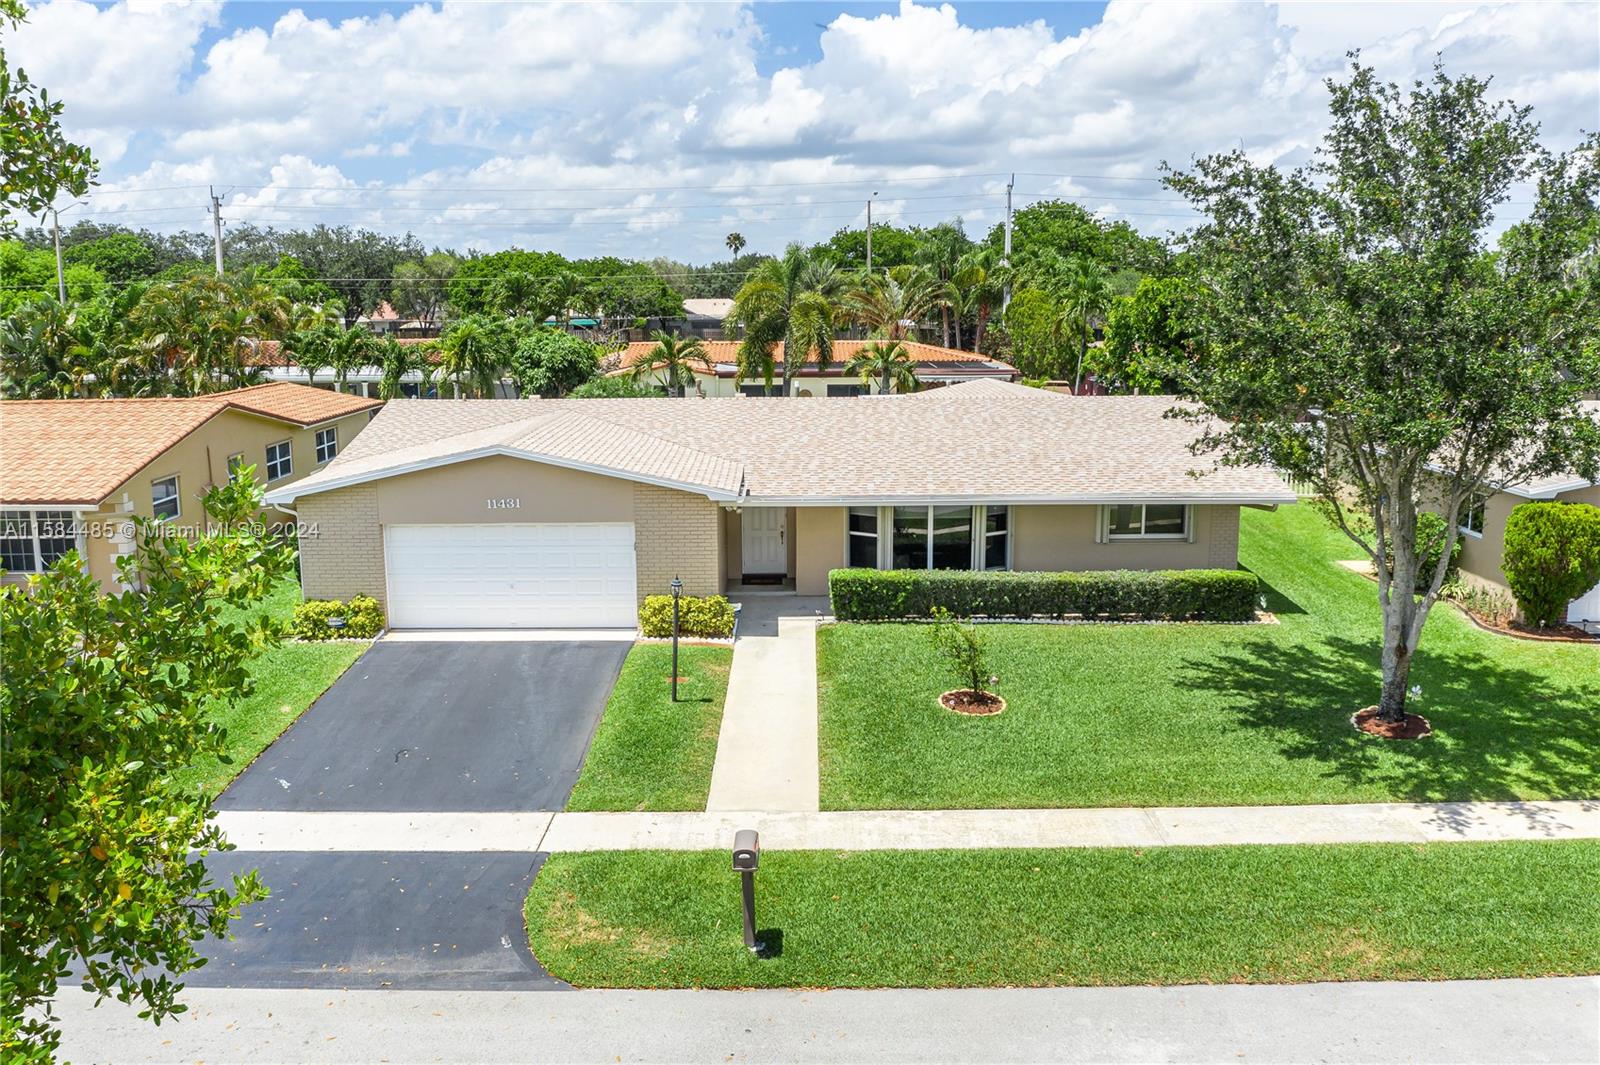 11431 Nw 23rd St, Pembroke Pines, Miami-Dade County, Florida - 4 Bedrooms  
2 Bathrooms - 